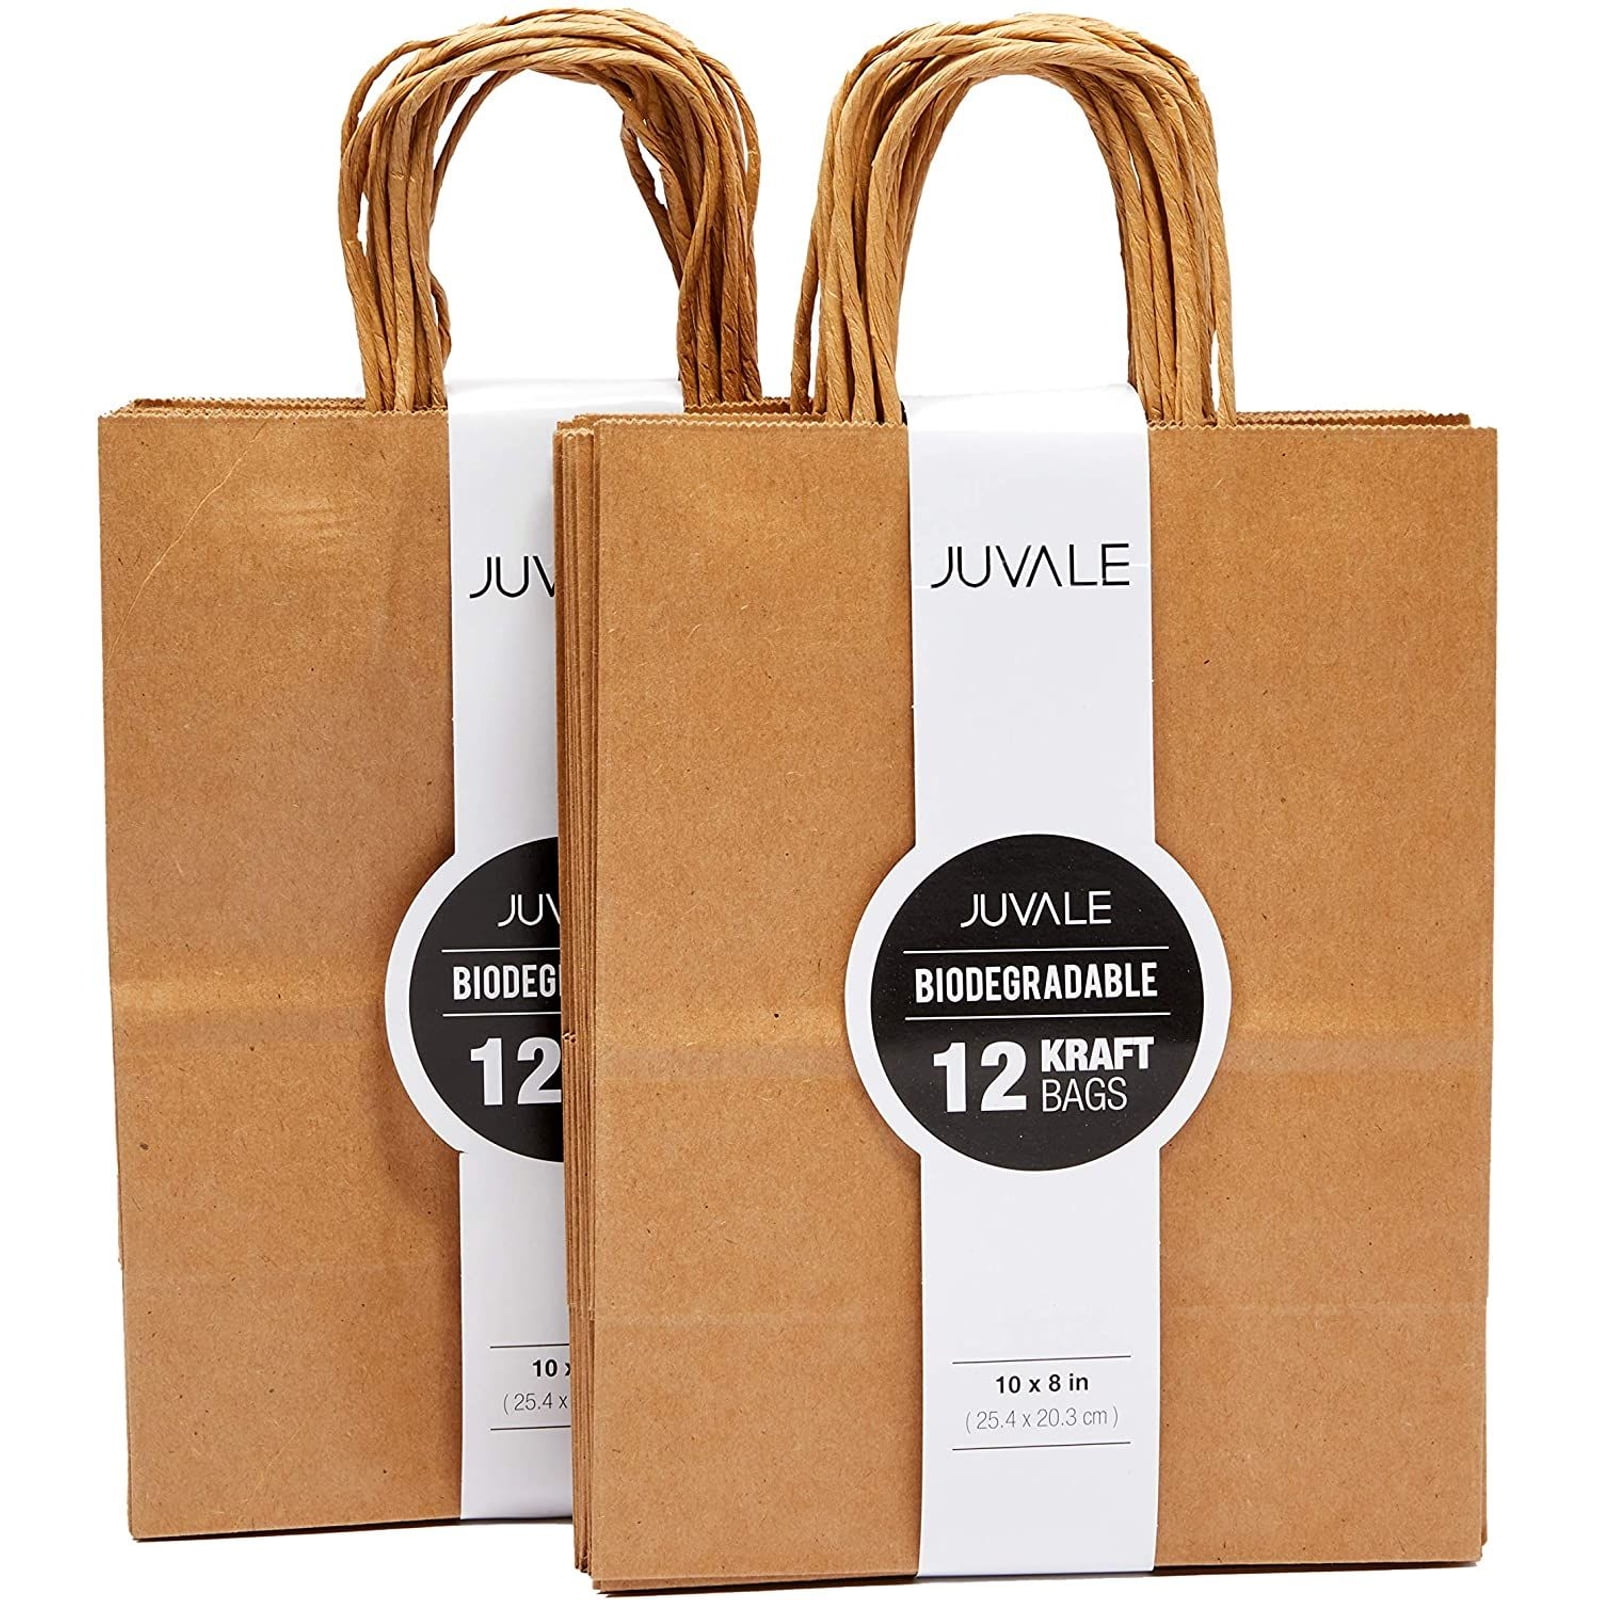 Set of 24 Parties Gifts 3 x 4 inch Small Brown Kraft Paper Bags for Favors 